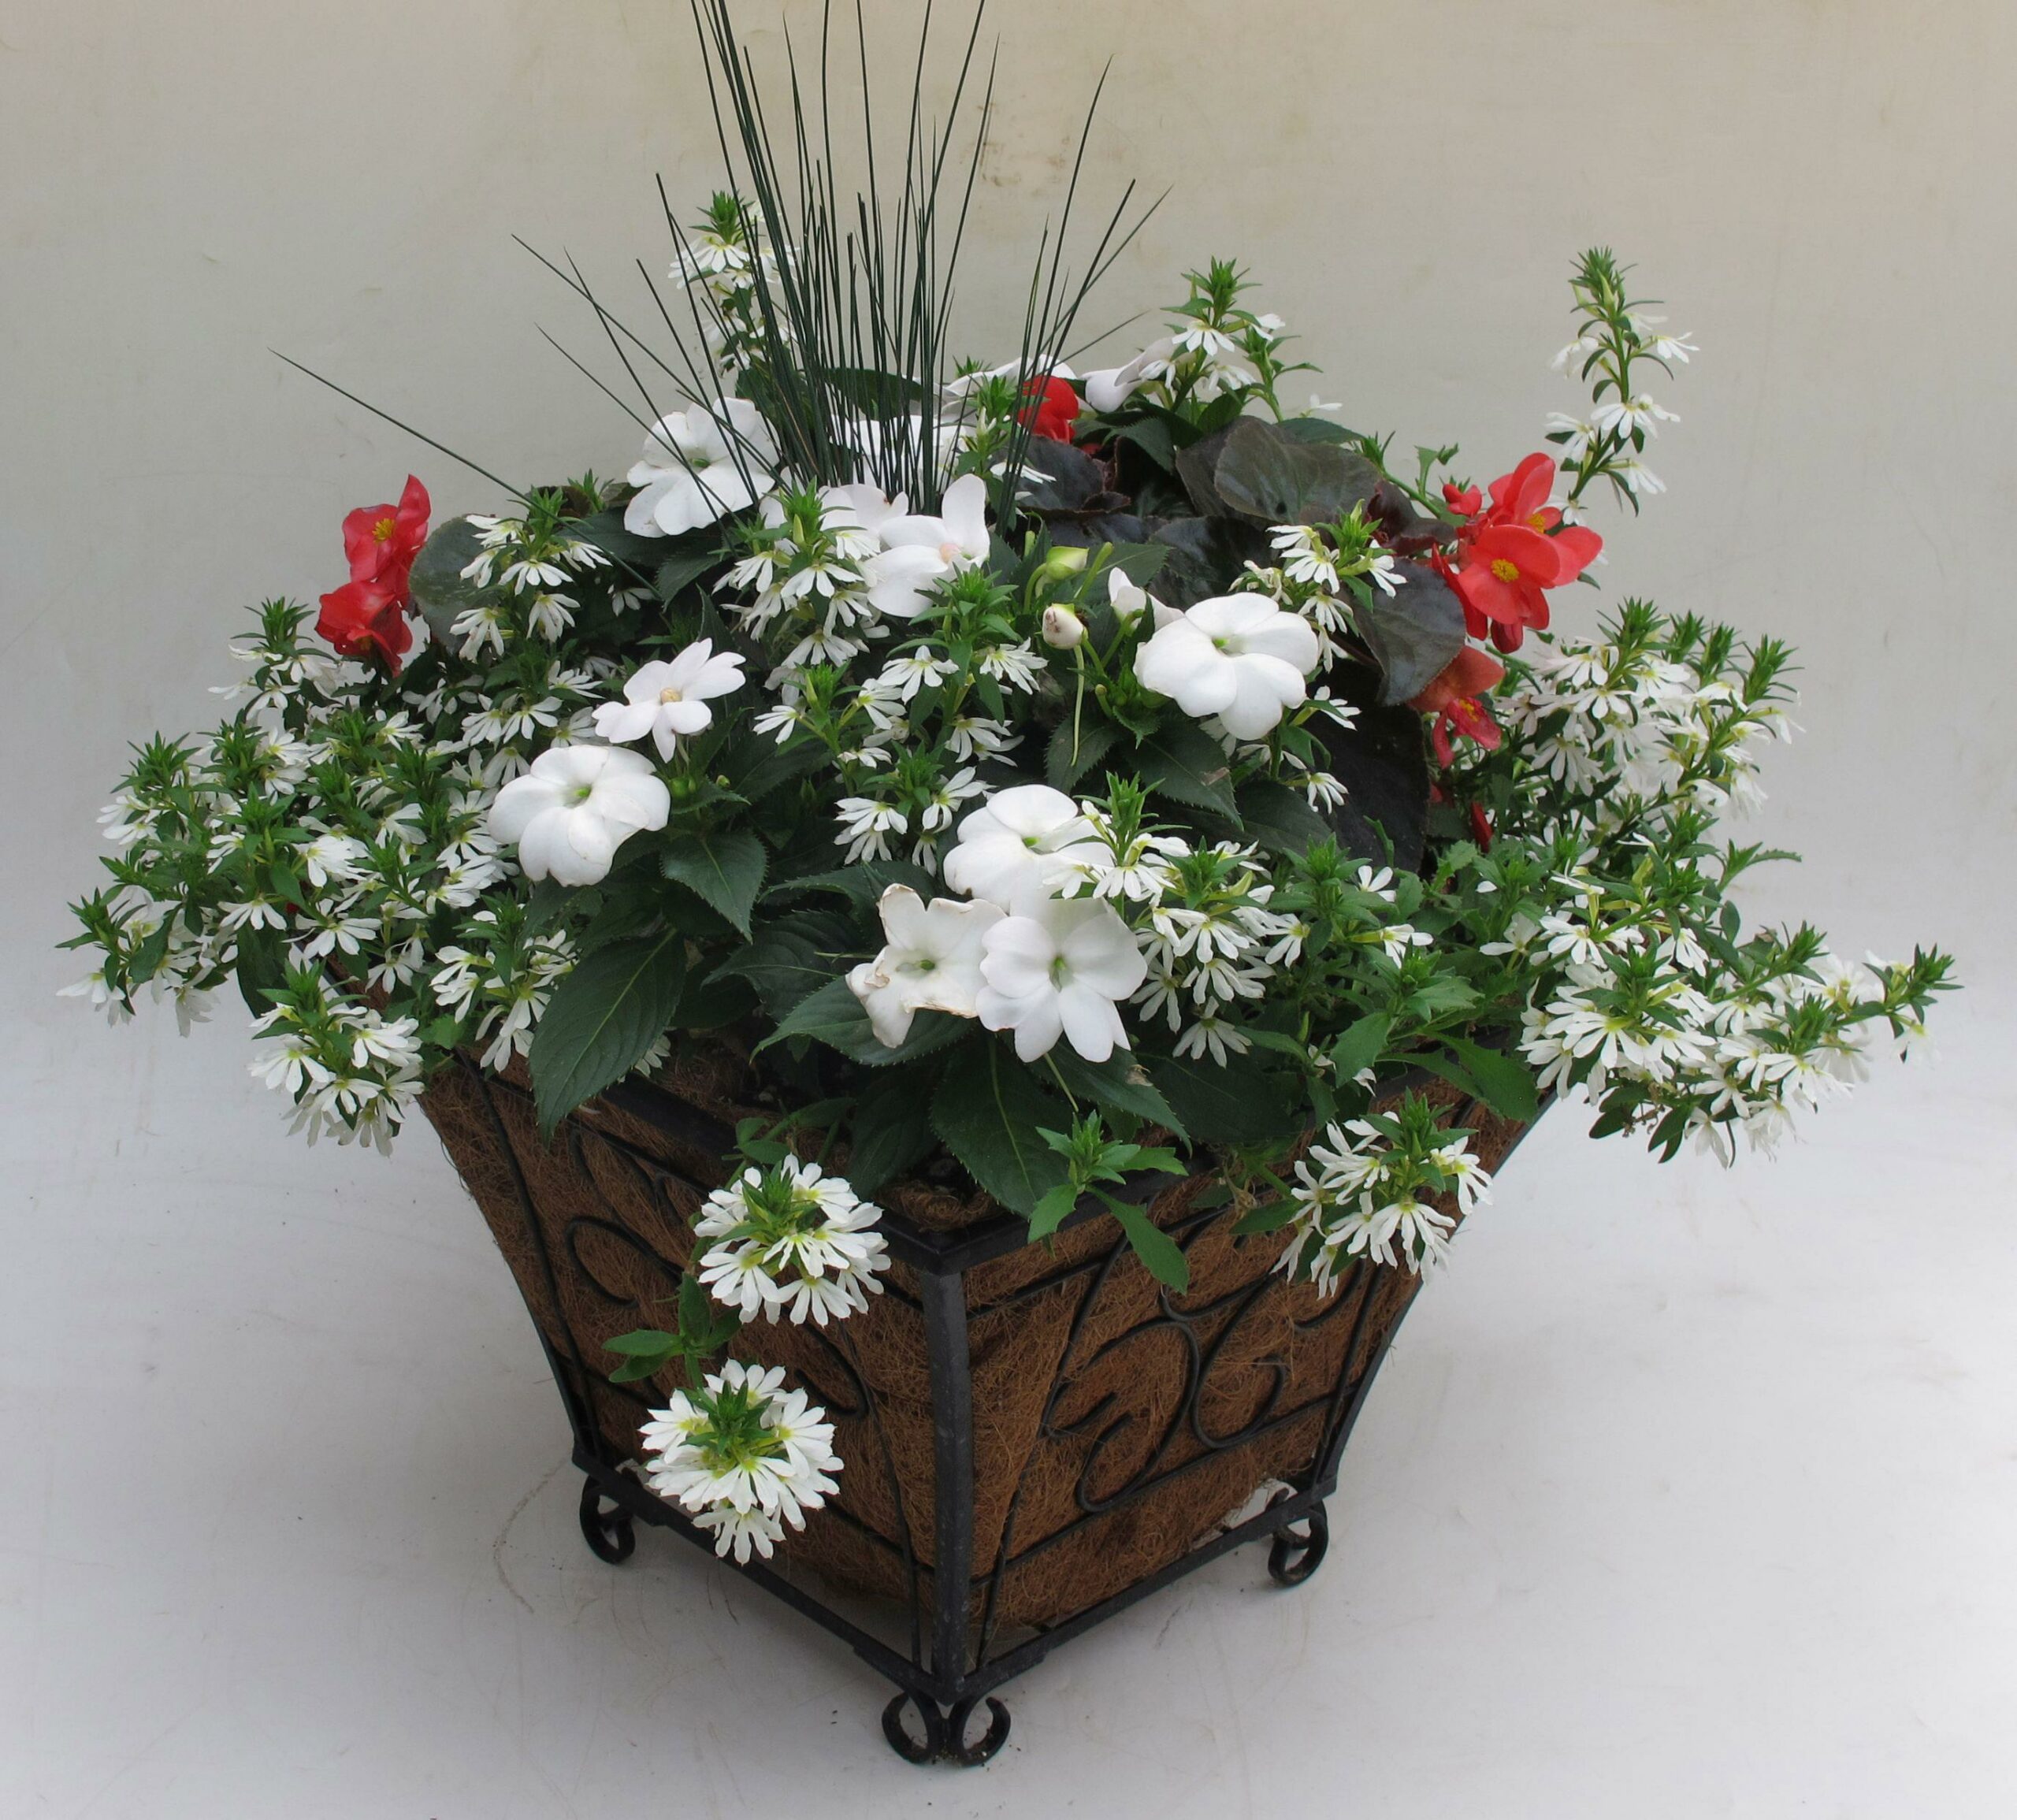 Plant Your Own Container Garden: 5/23 @6pm @ Wenke Greenhouse Retail Store | Kalamazoo | MI | US